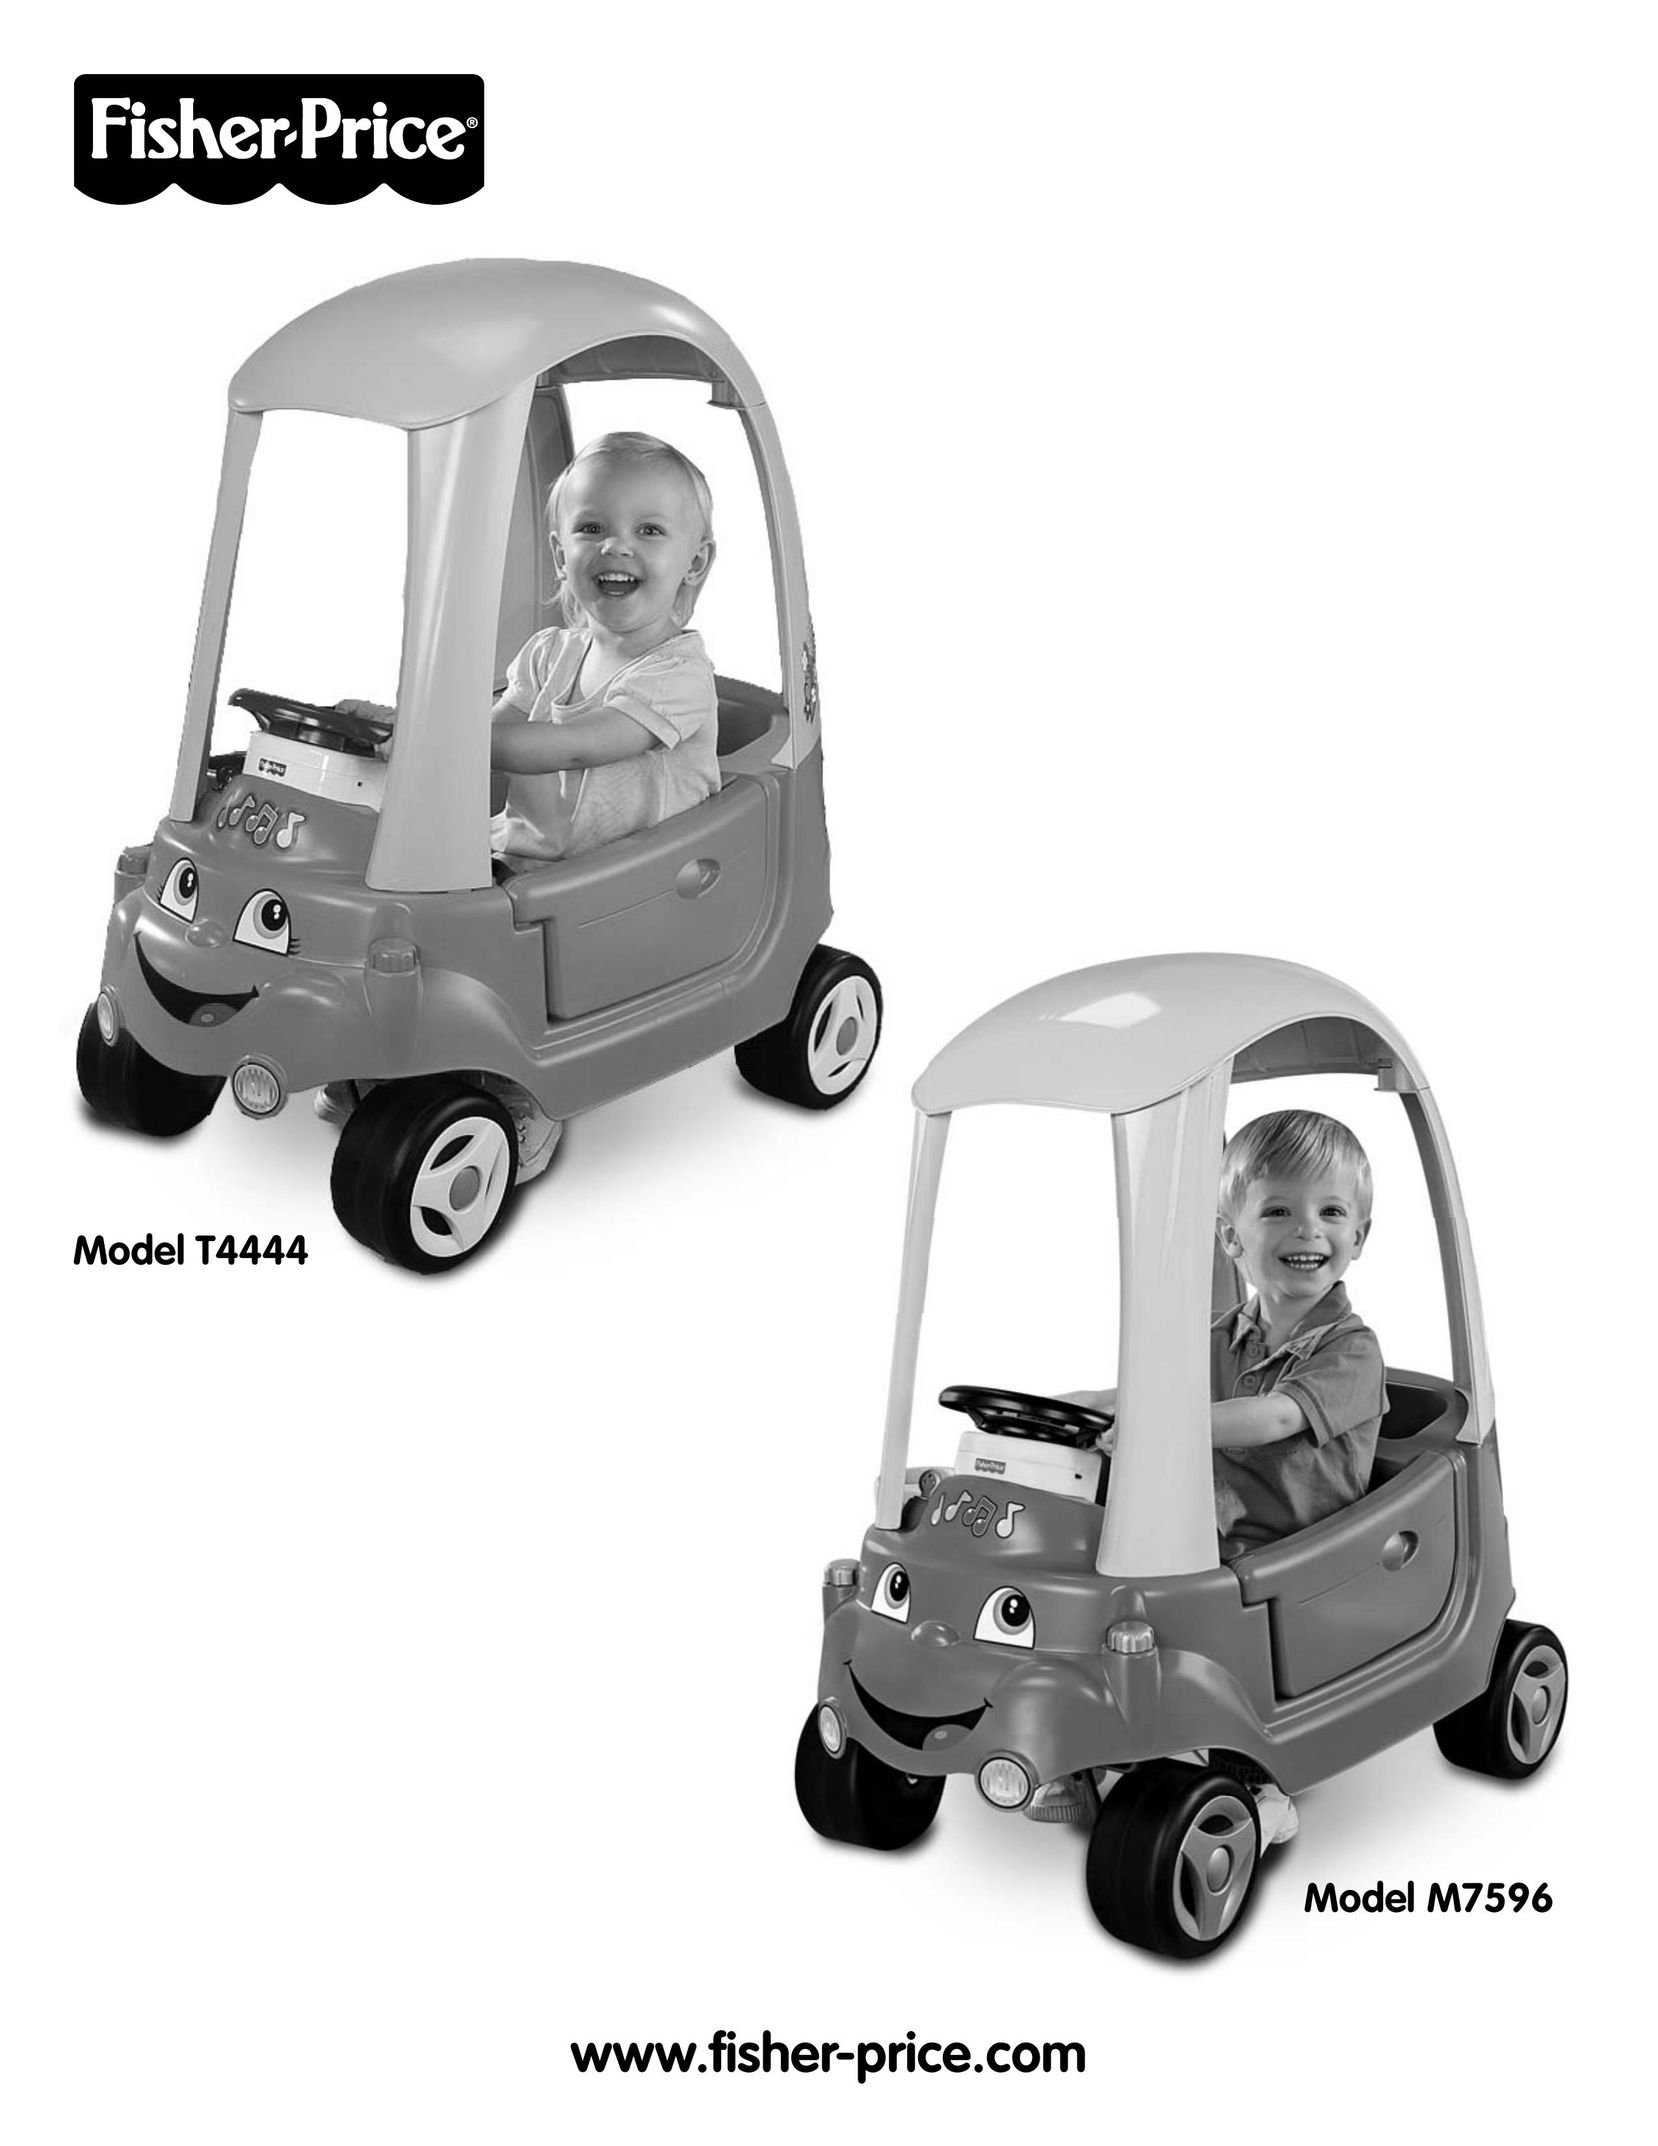 Fisher-Price T4444 Riding Toy User Manual